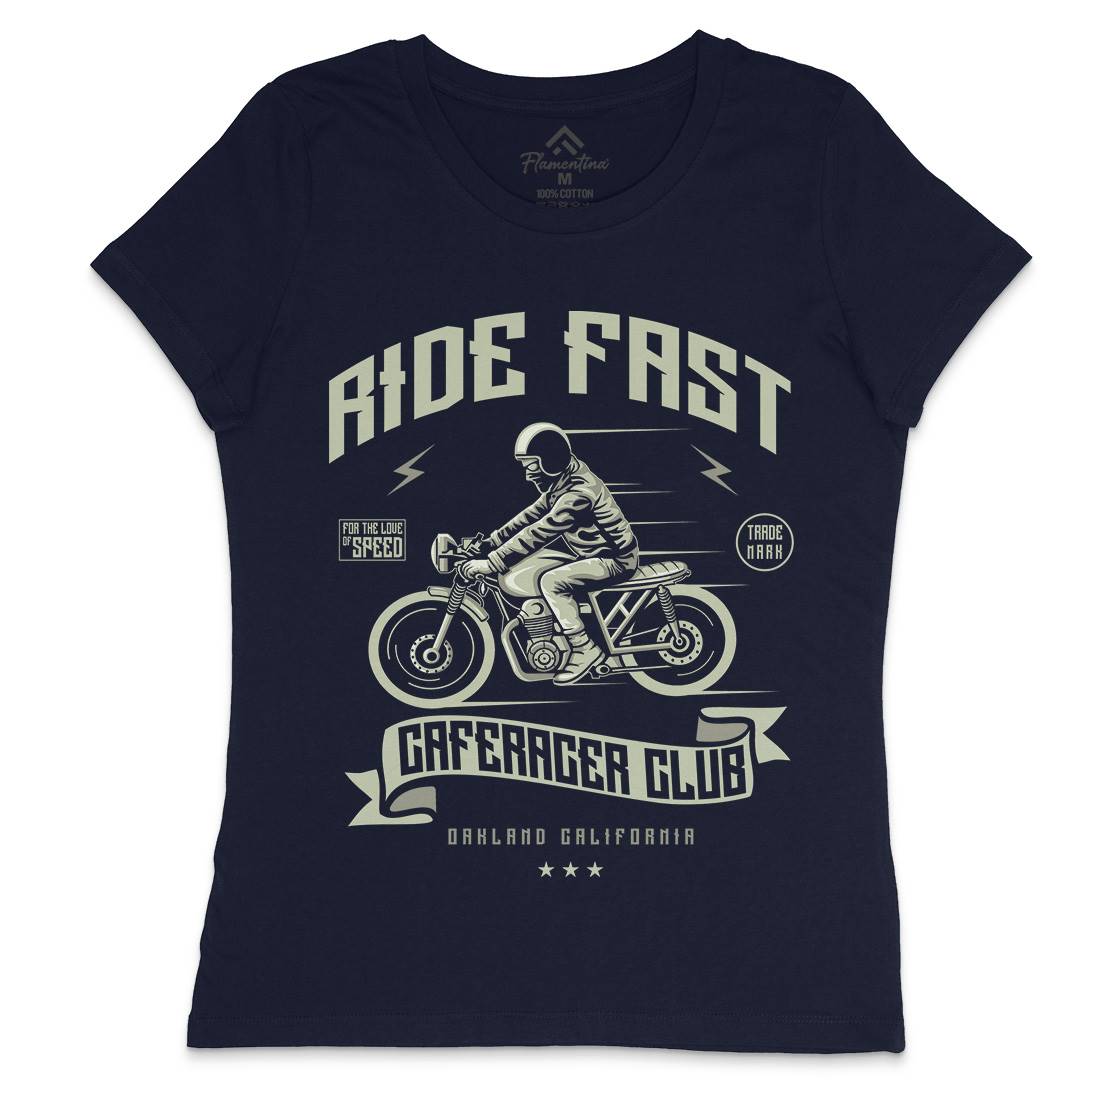 Ride Fast Womens Crew Neck T-Shirt Motorcycles A117